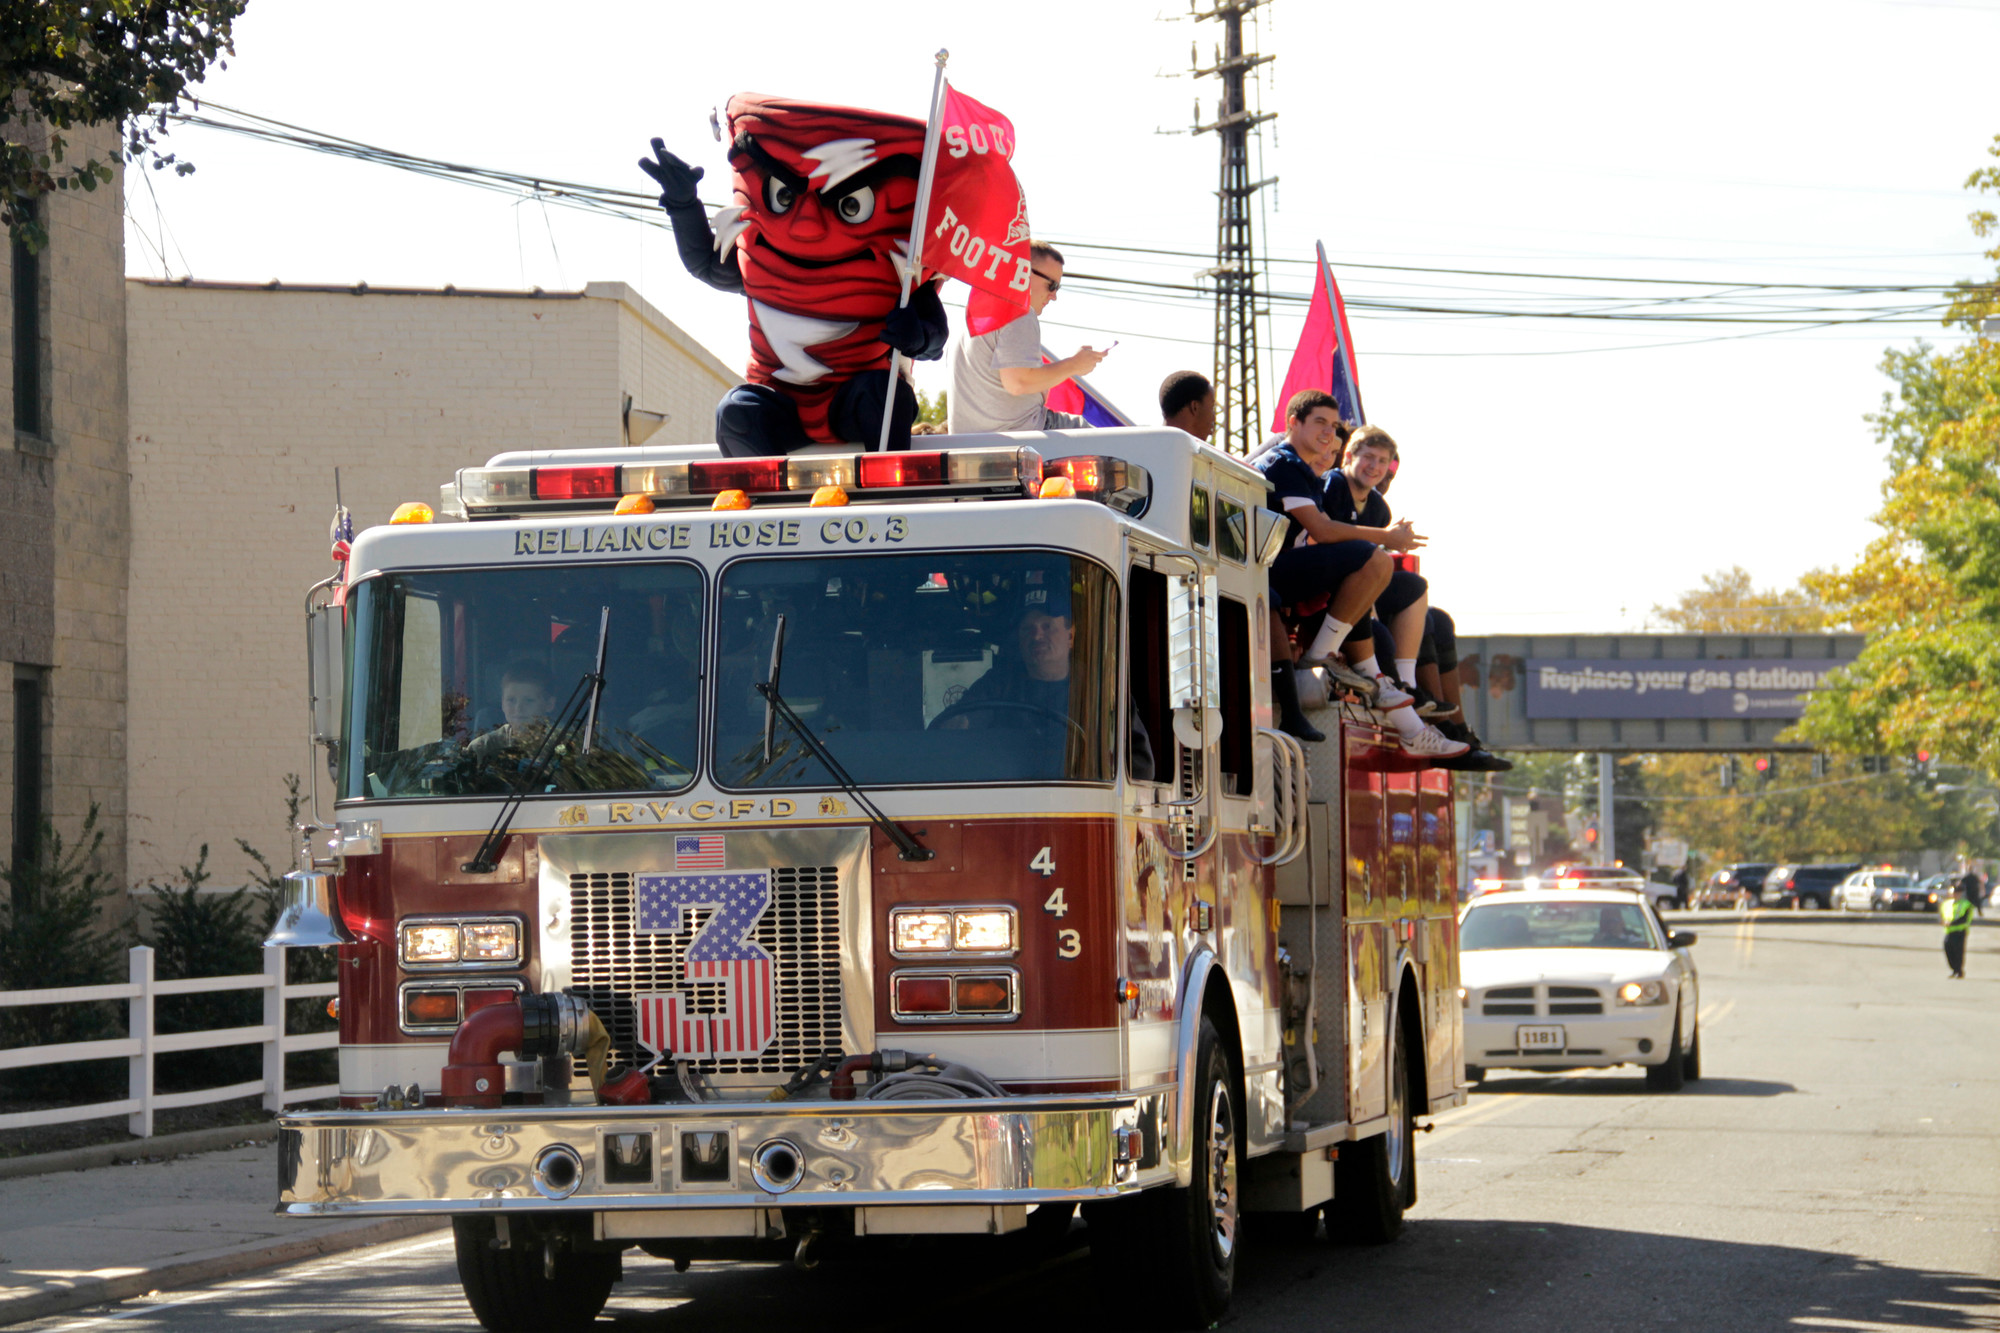 The South Side High School football team, and the school’s new mascot, rode atop an RVCFD truck during the high school’s Homecoming parade on Oct. 10. (Sue Grieco/Herald)